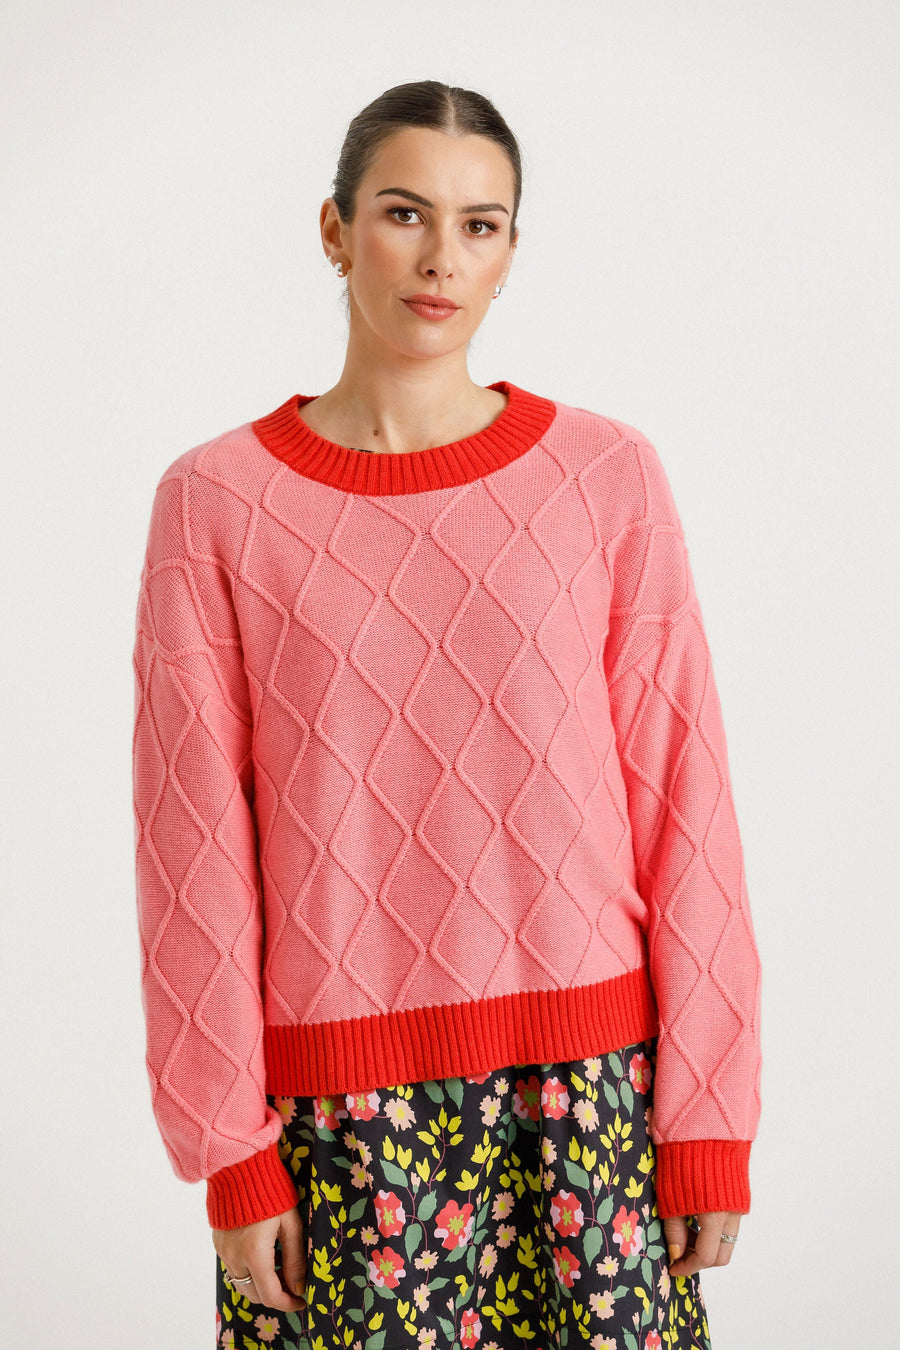 THING THING SHACKLE JUMPER - PINK LIPSTICK - WILDROSE